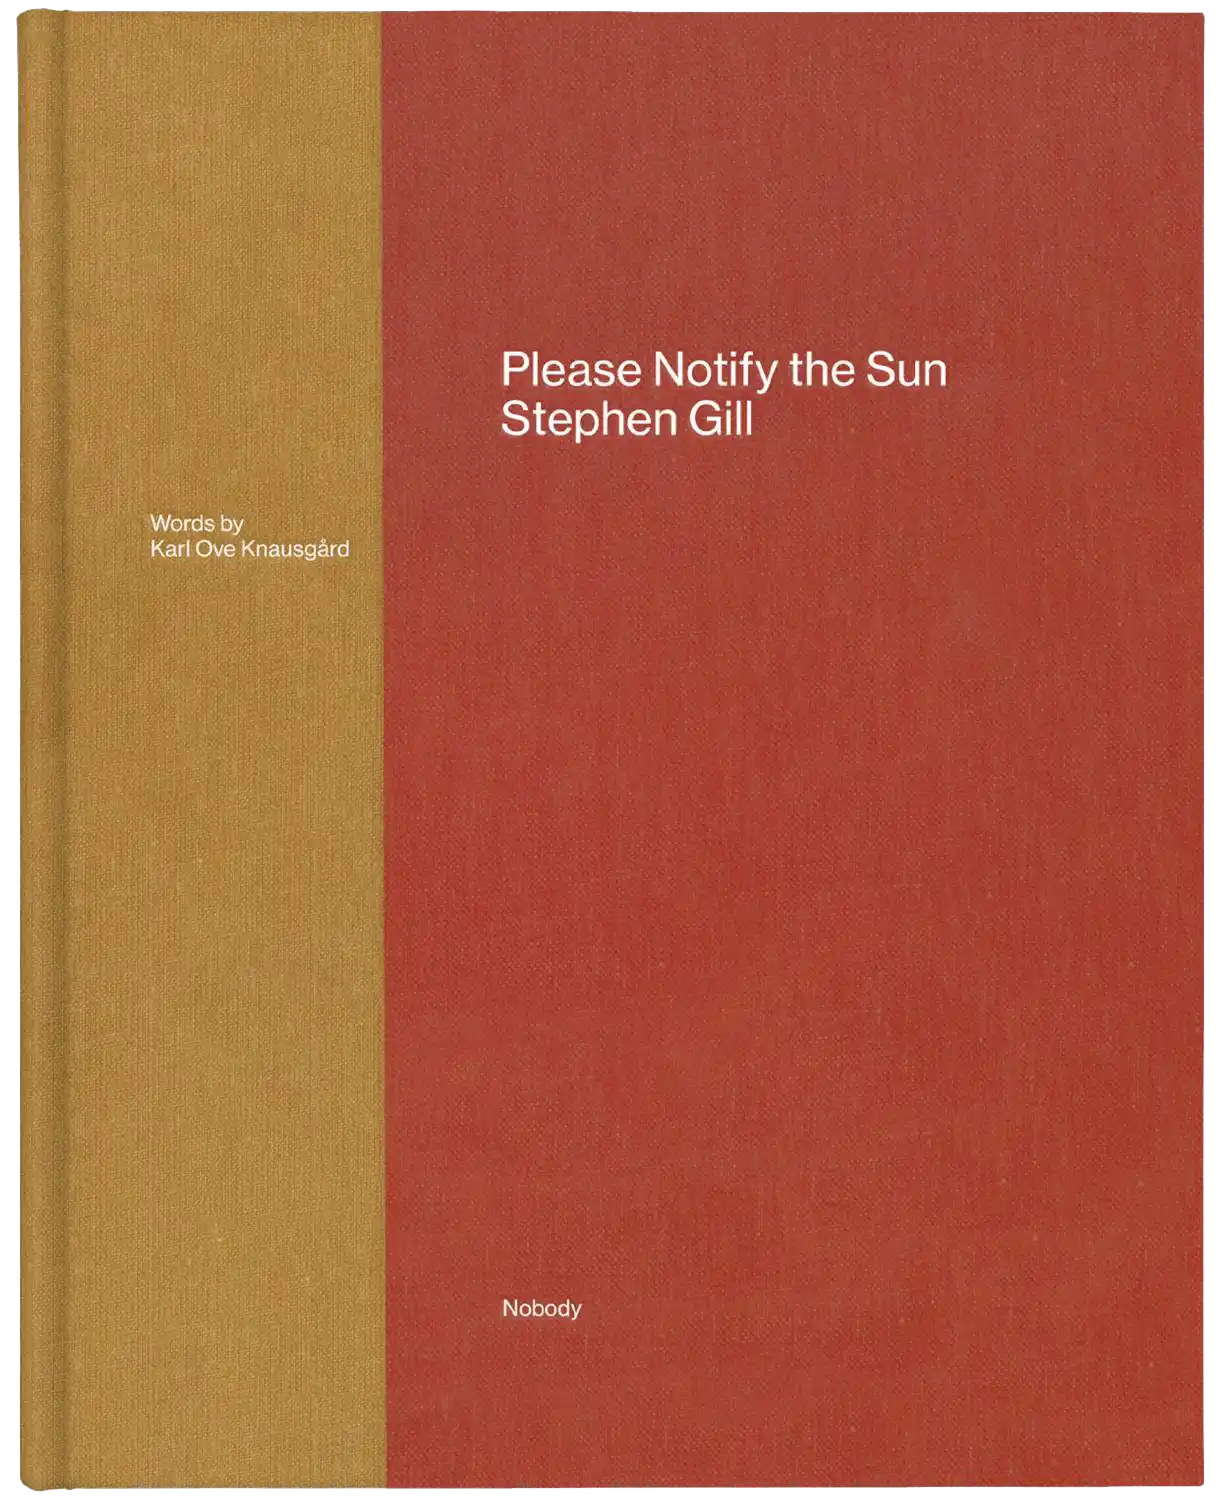 Please Notify the Sun by Stephen Gill